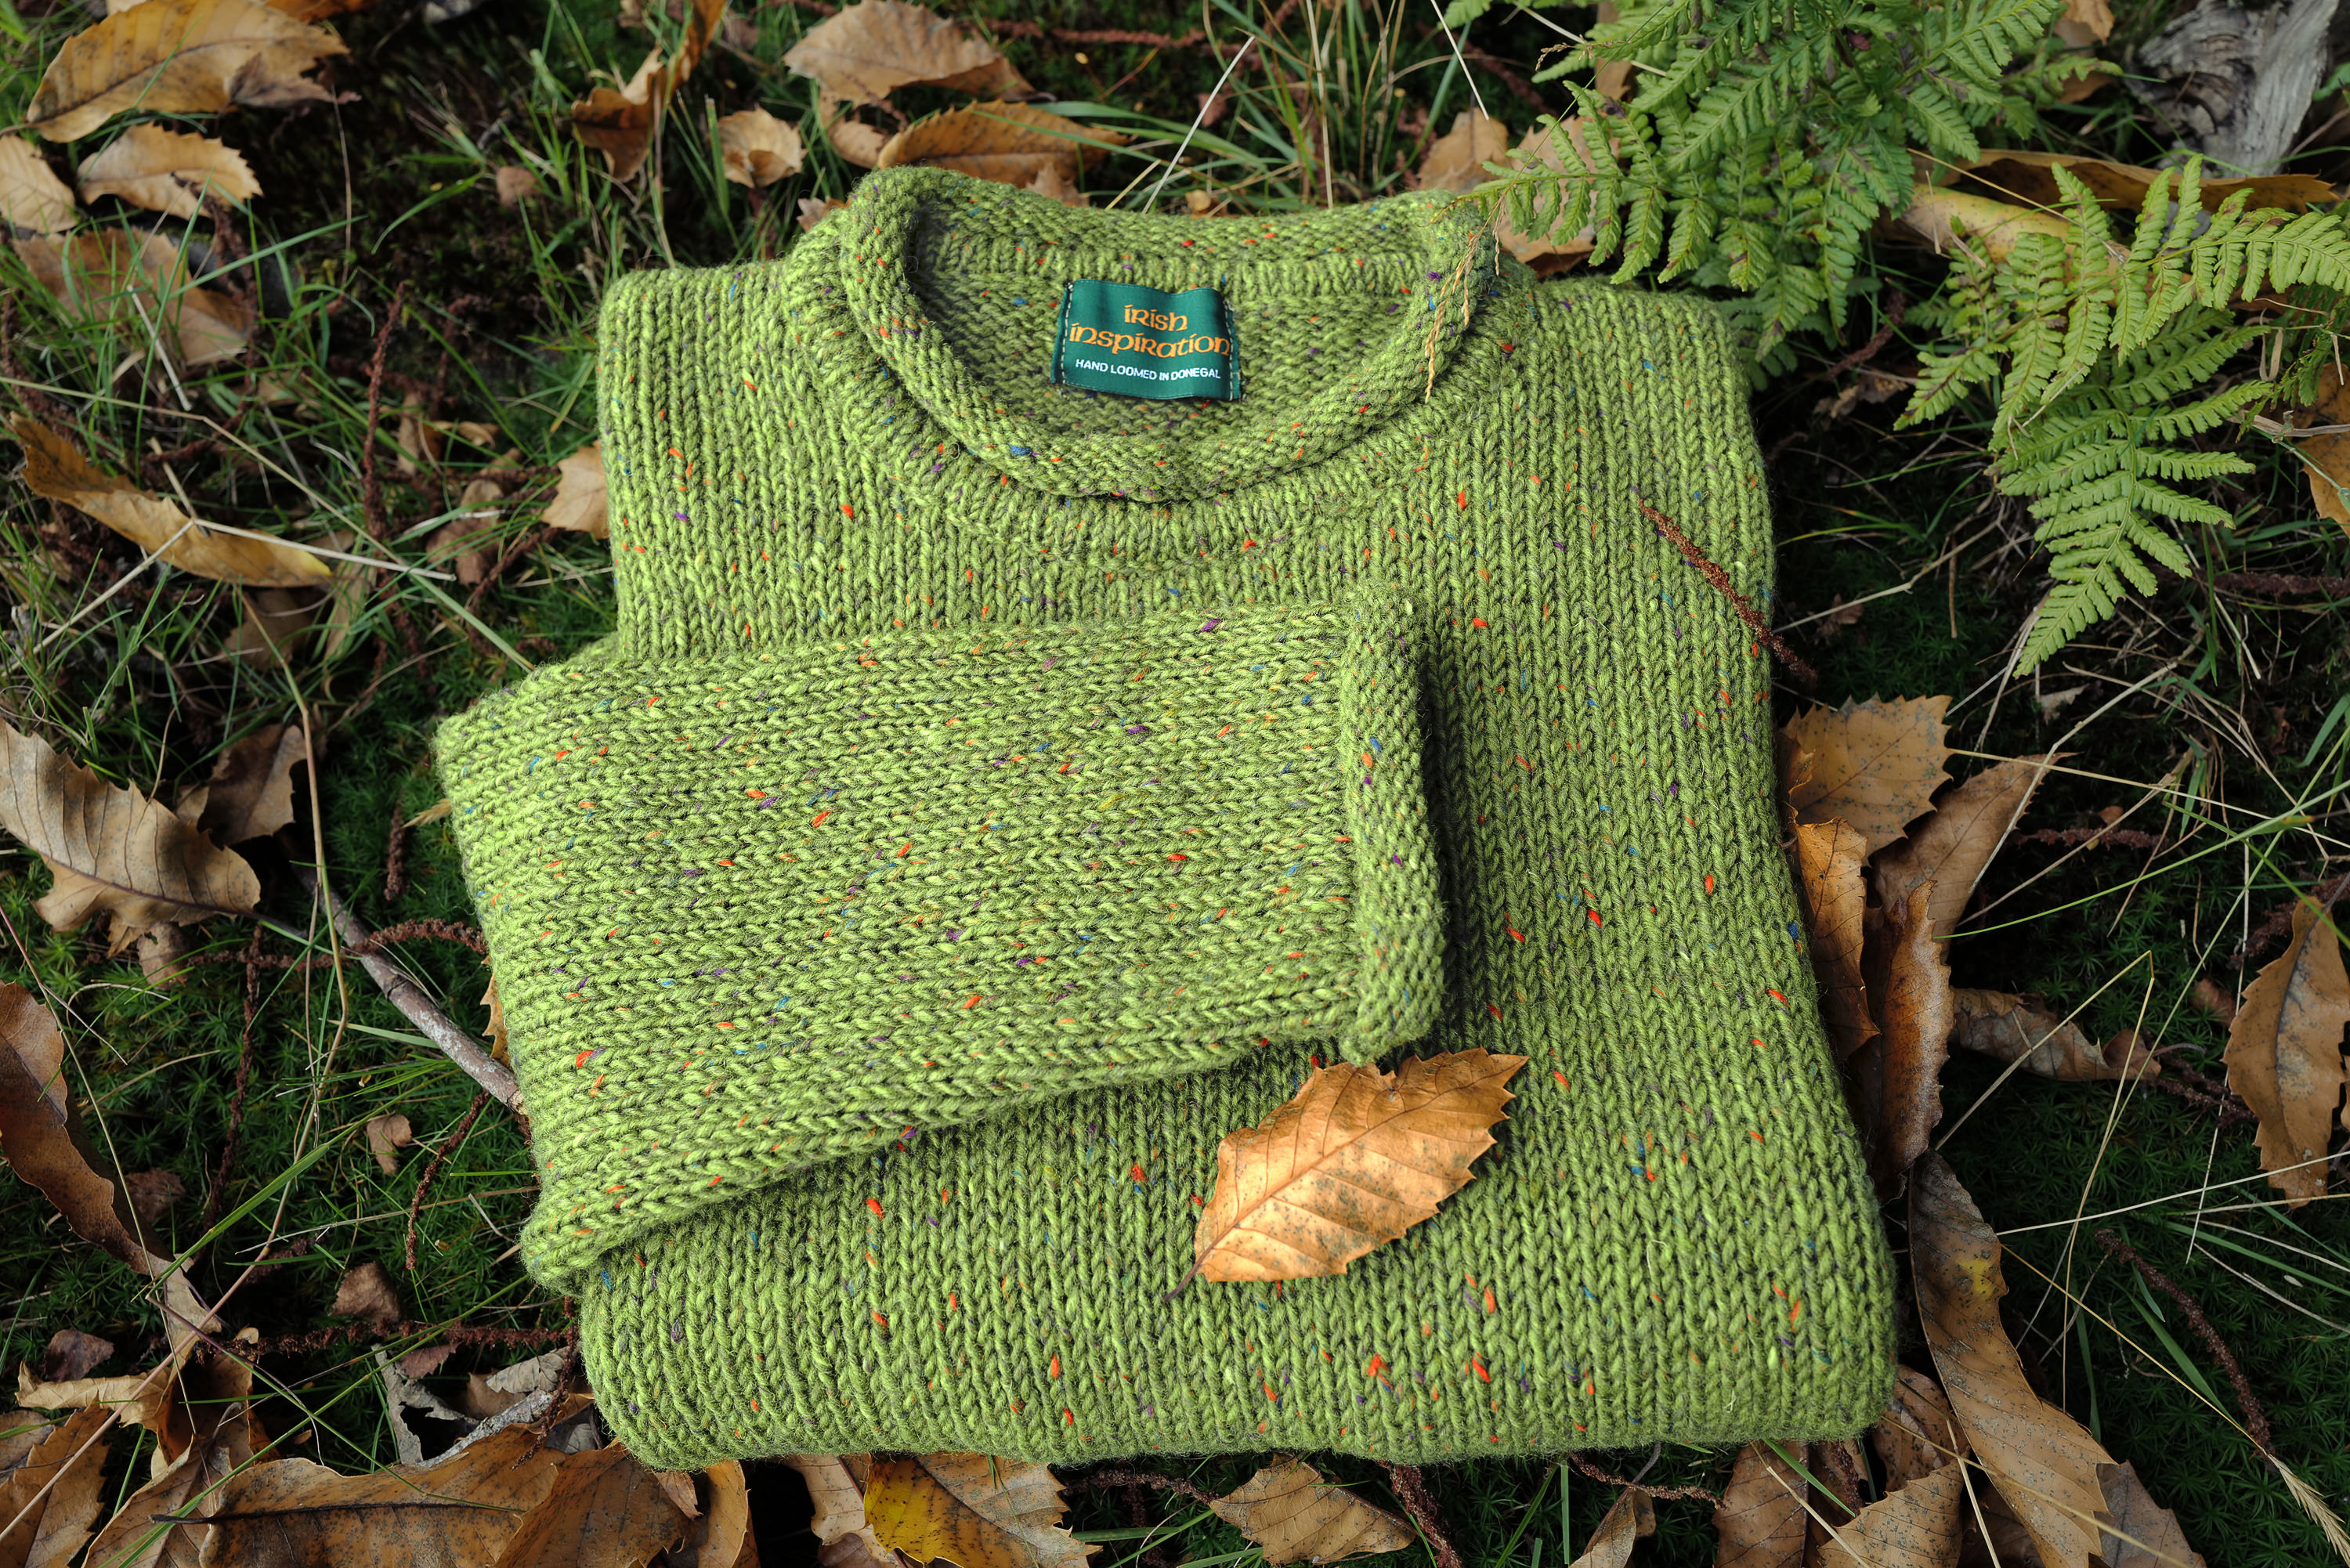 Bright green hand loomed sweater in Donegal tweed yarn from Irish